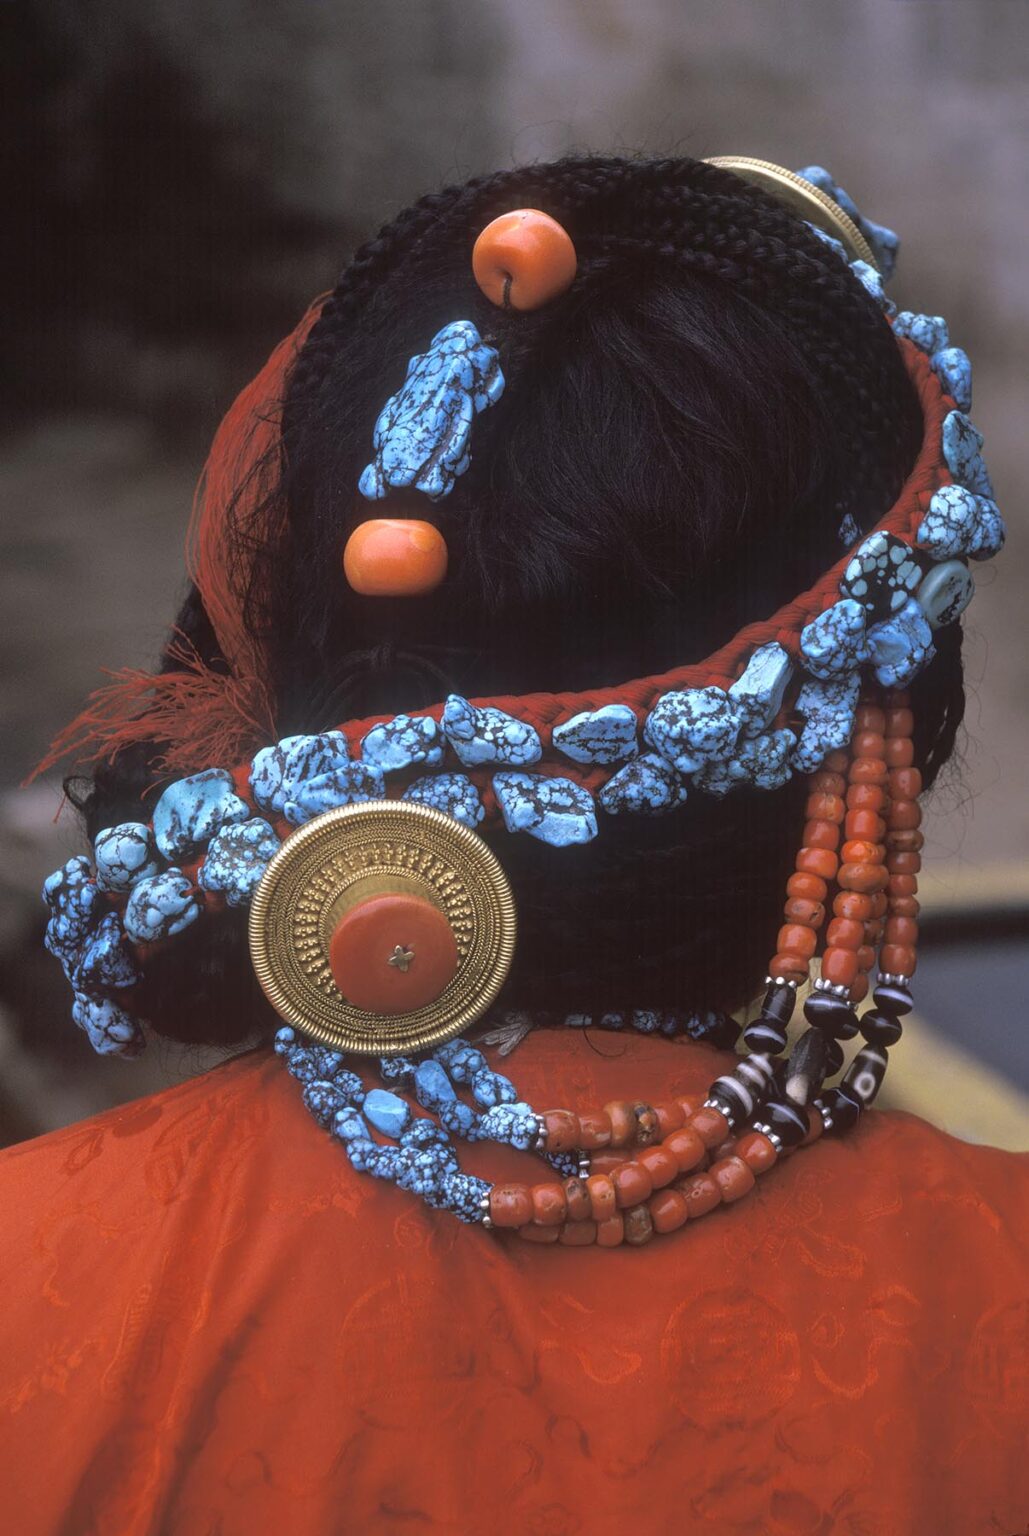 TURQUOISE, CORAL and GOLD decorate this TIBETAN WOMAN'S hair - LHASA, TIBET